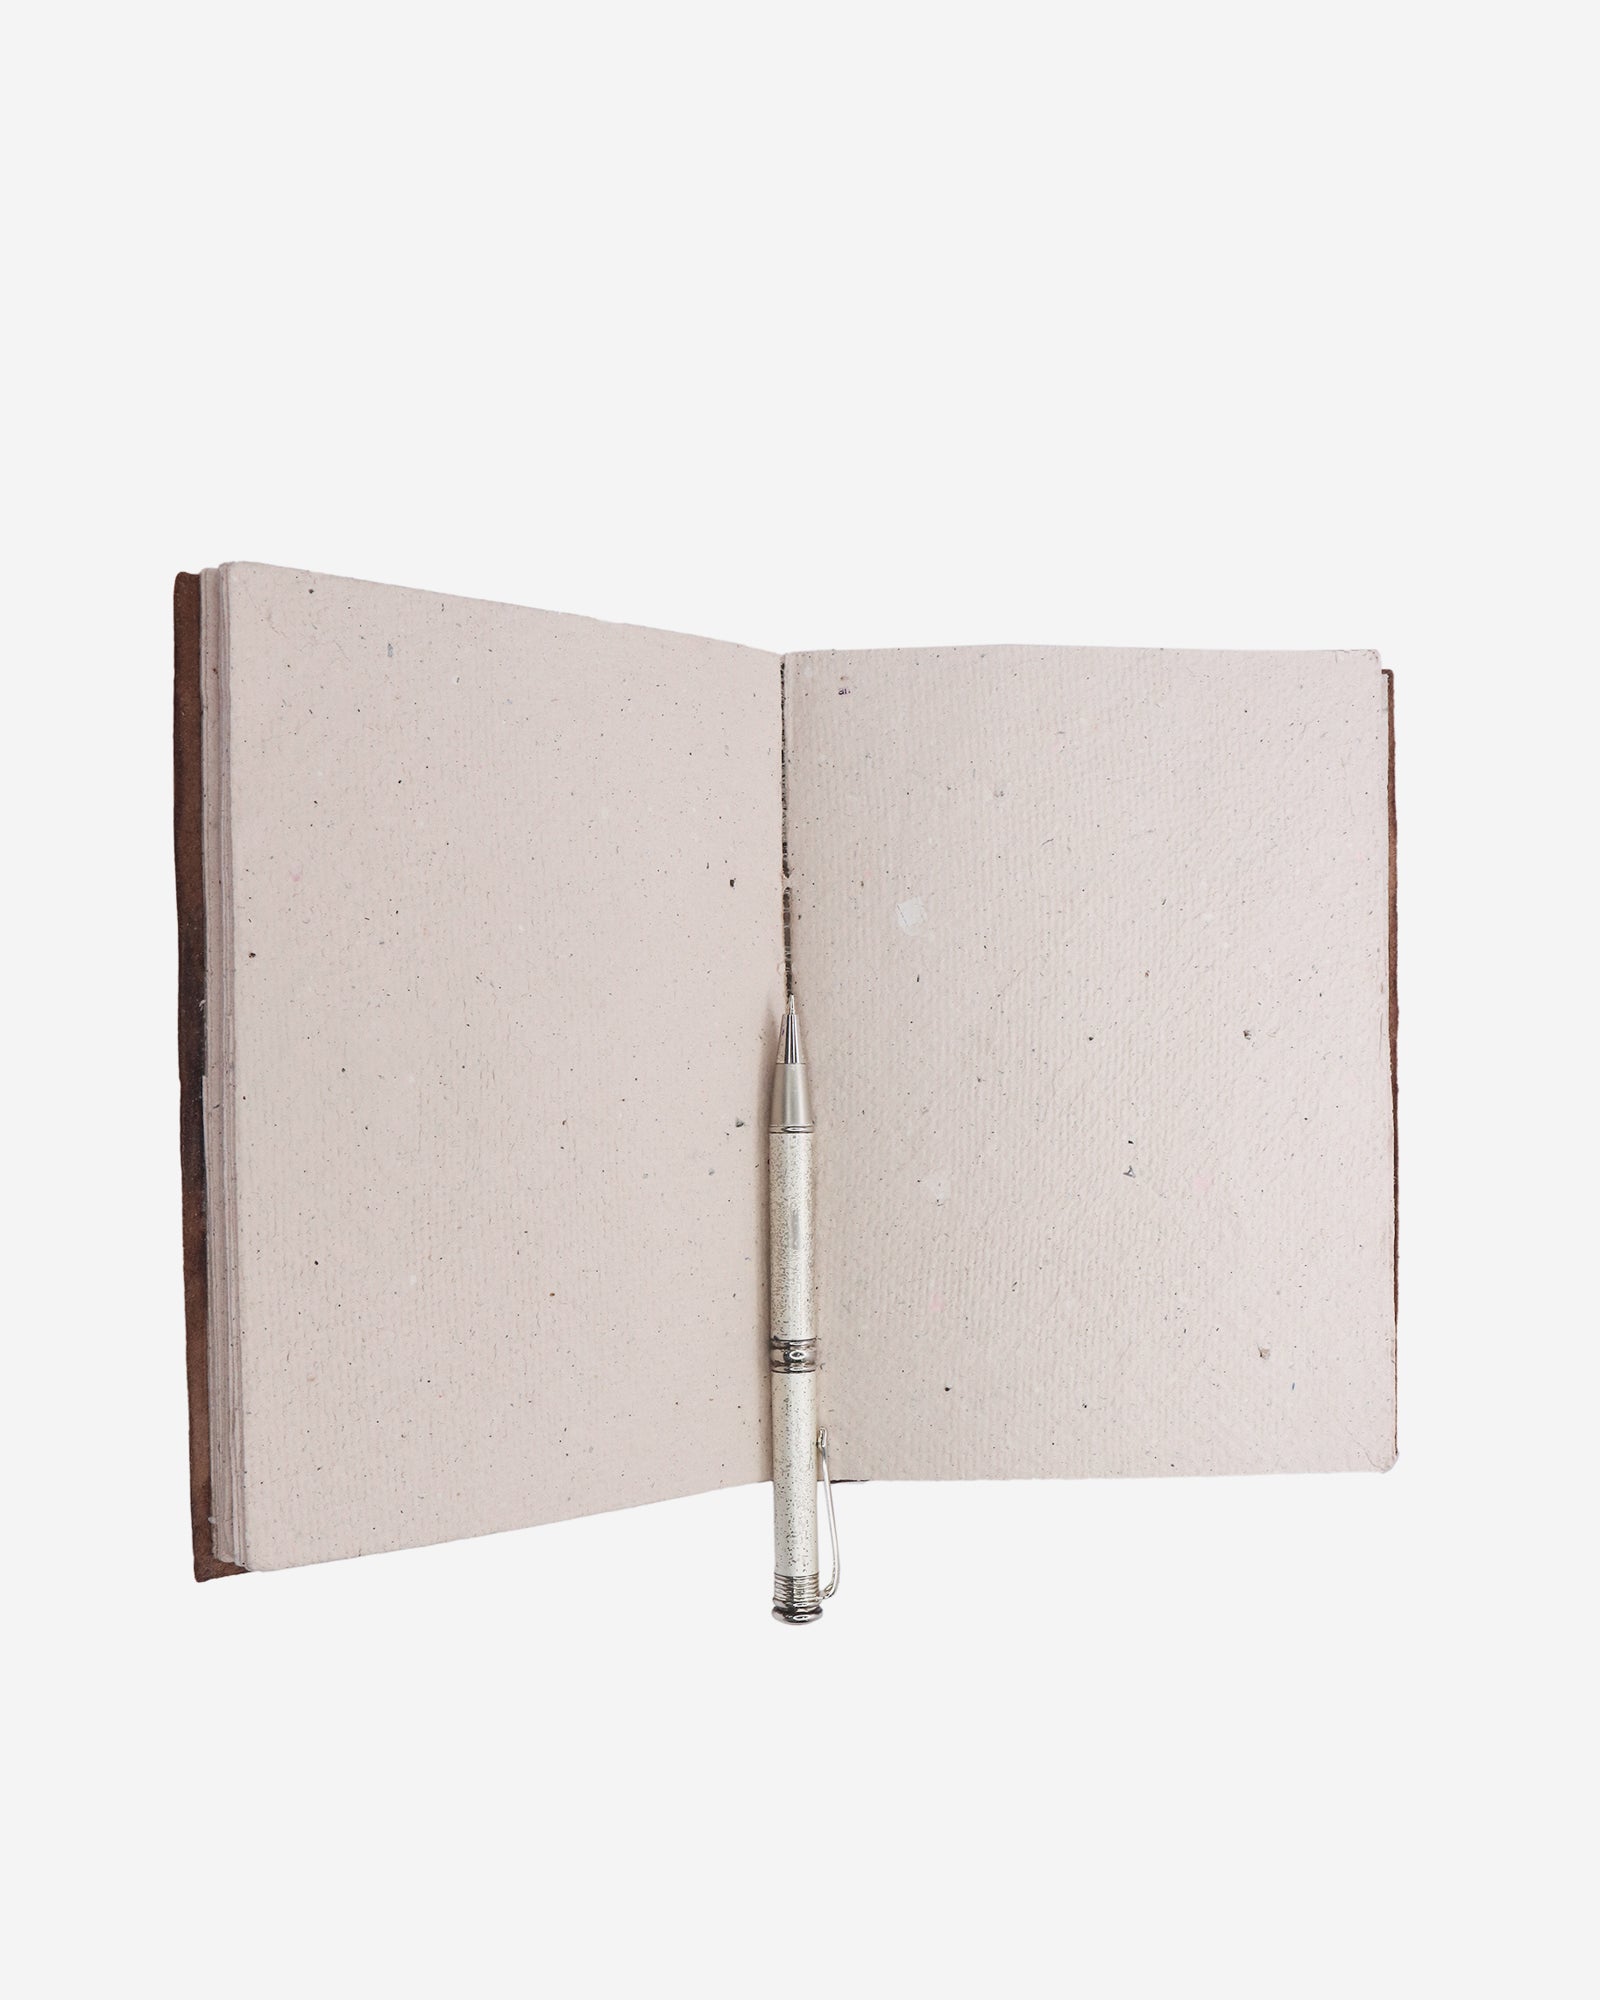 Salmon Pink Leather Diary